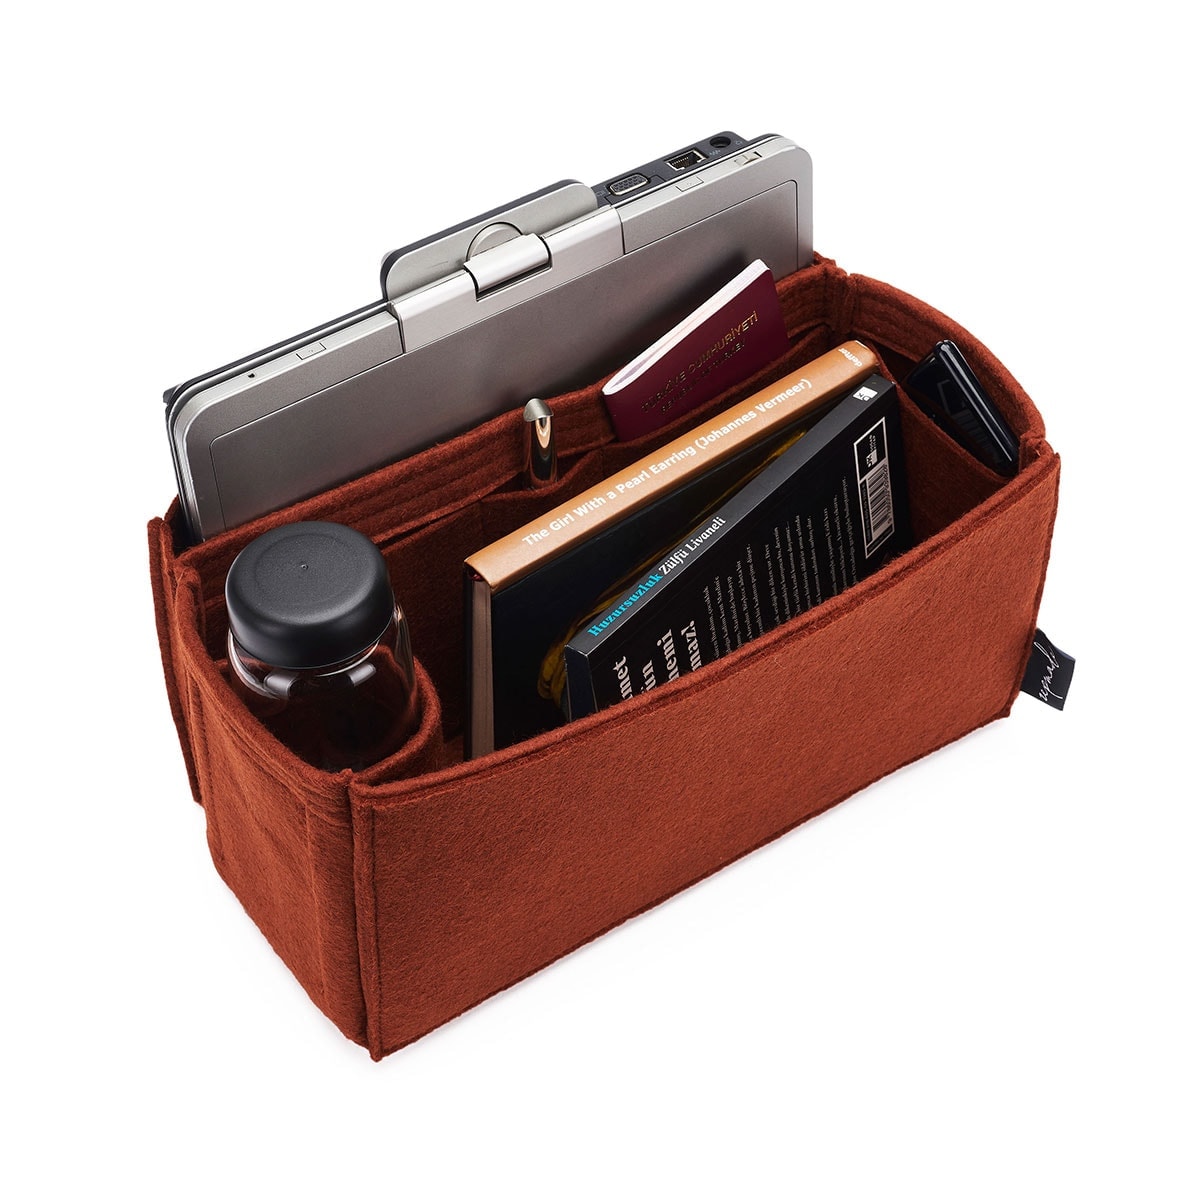 Louis Vuitton Delightful Organizer Insert, Bag Organizer with Laptop  Compartment and Pen Holder